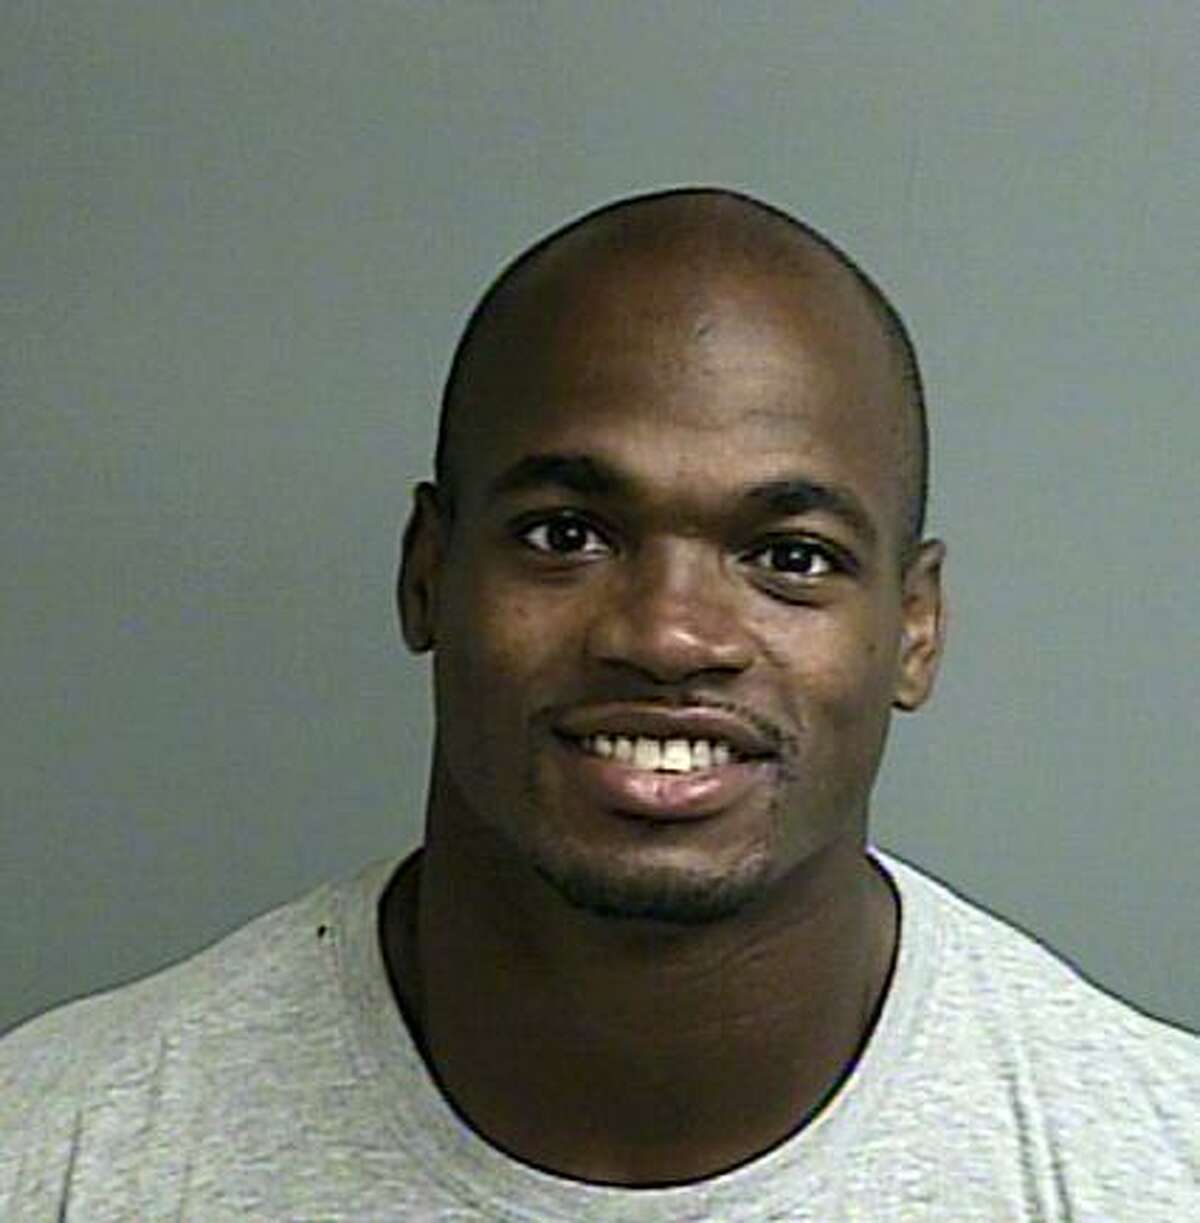 This photo provided by the Montgomery County sheriffâs office shows the booking photo of Adrian Peterson. Peterson was indicted in Texas for using a branch to spank one of his sons and the Minnesota Vikings promptly benched him for their game Sunday, Sept. 14, 2014 against the New England Patriots. (AP Photo/Montgomery County sheriffâs office)